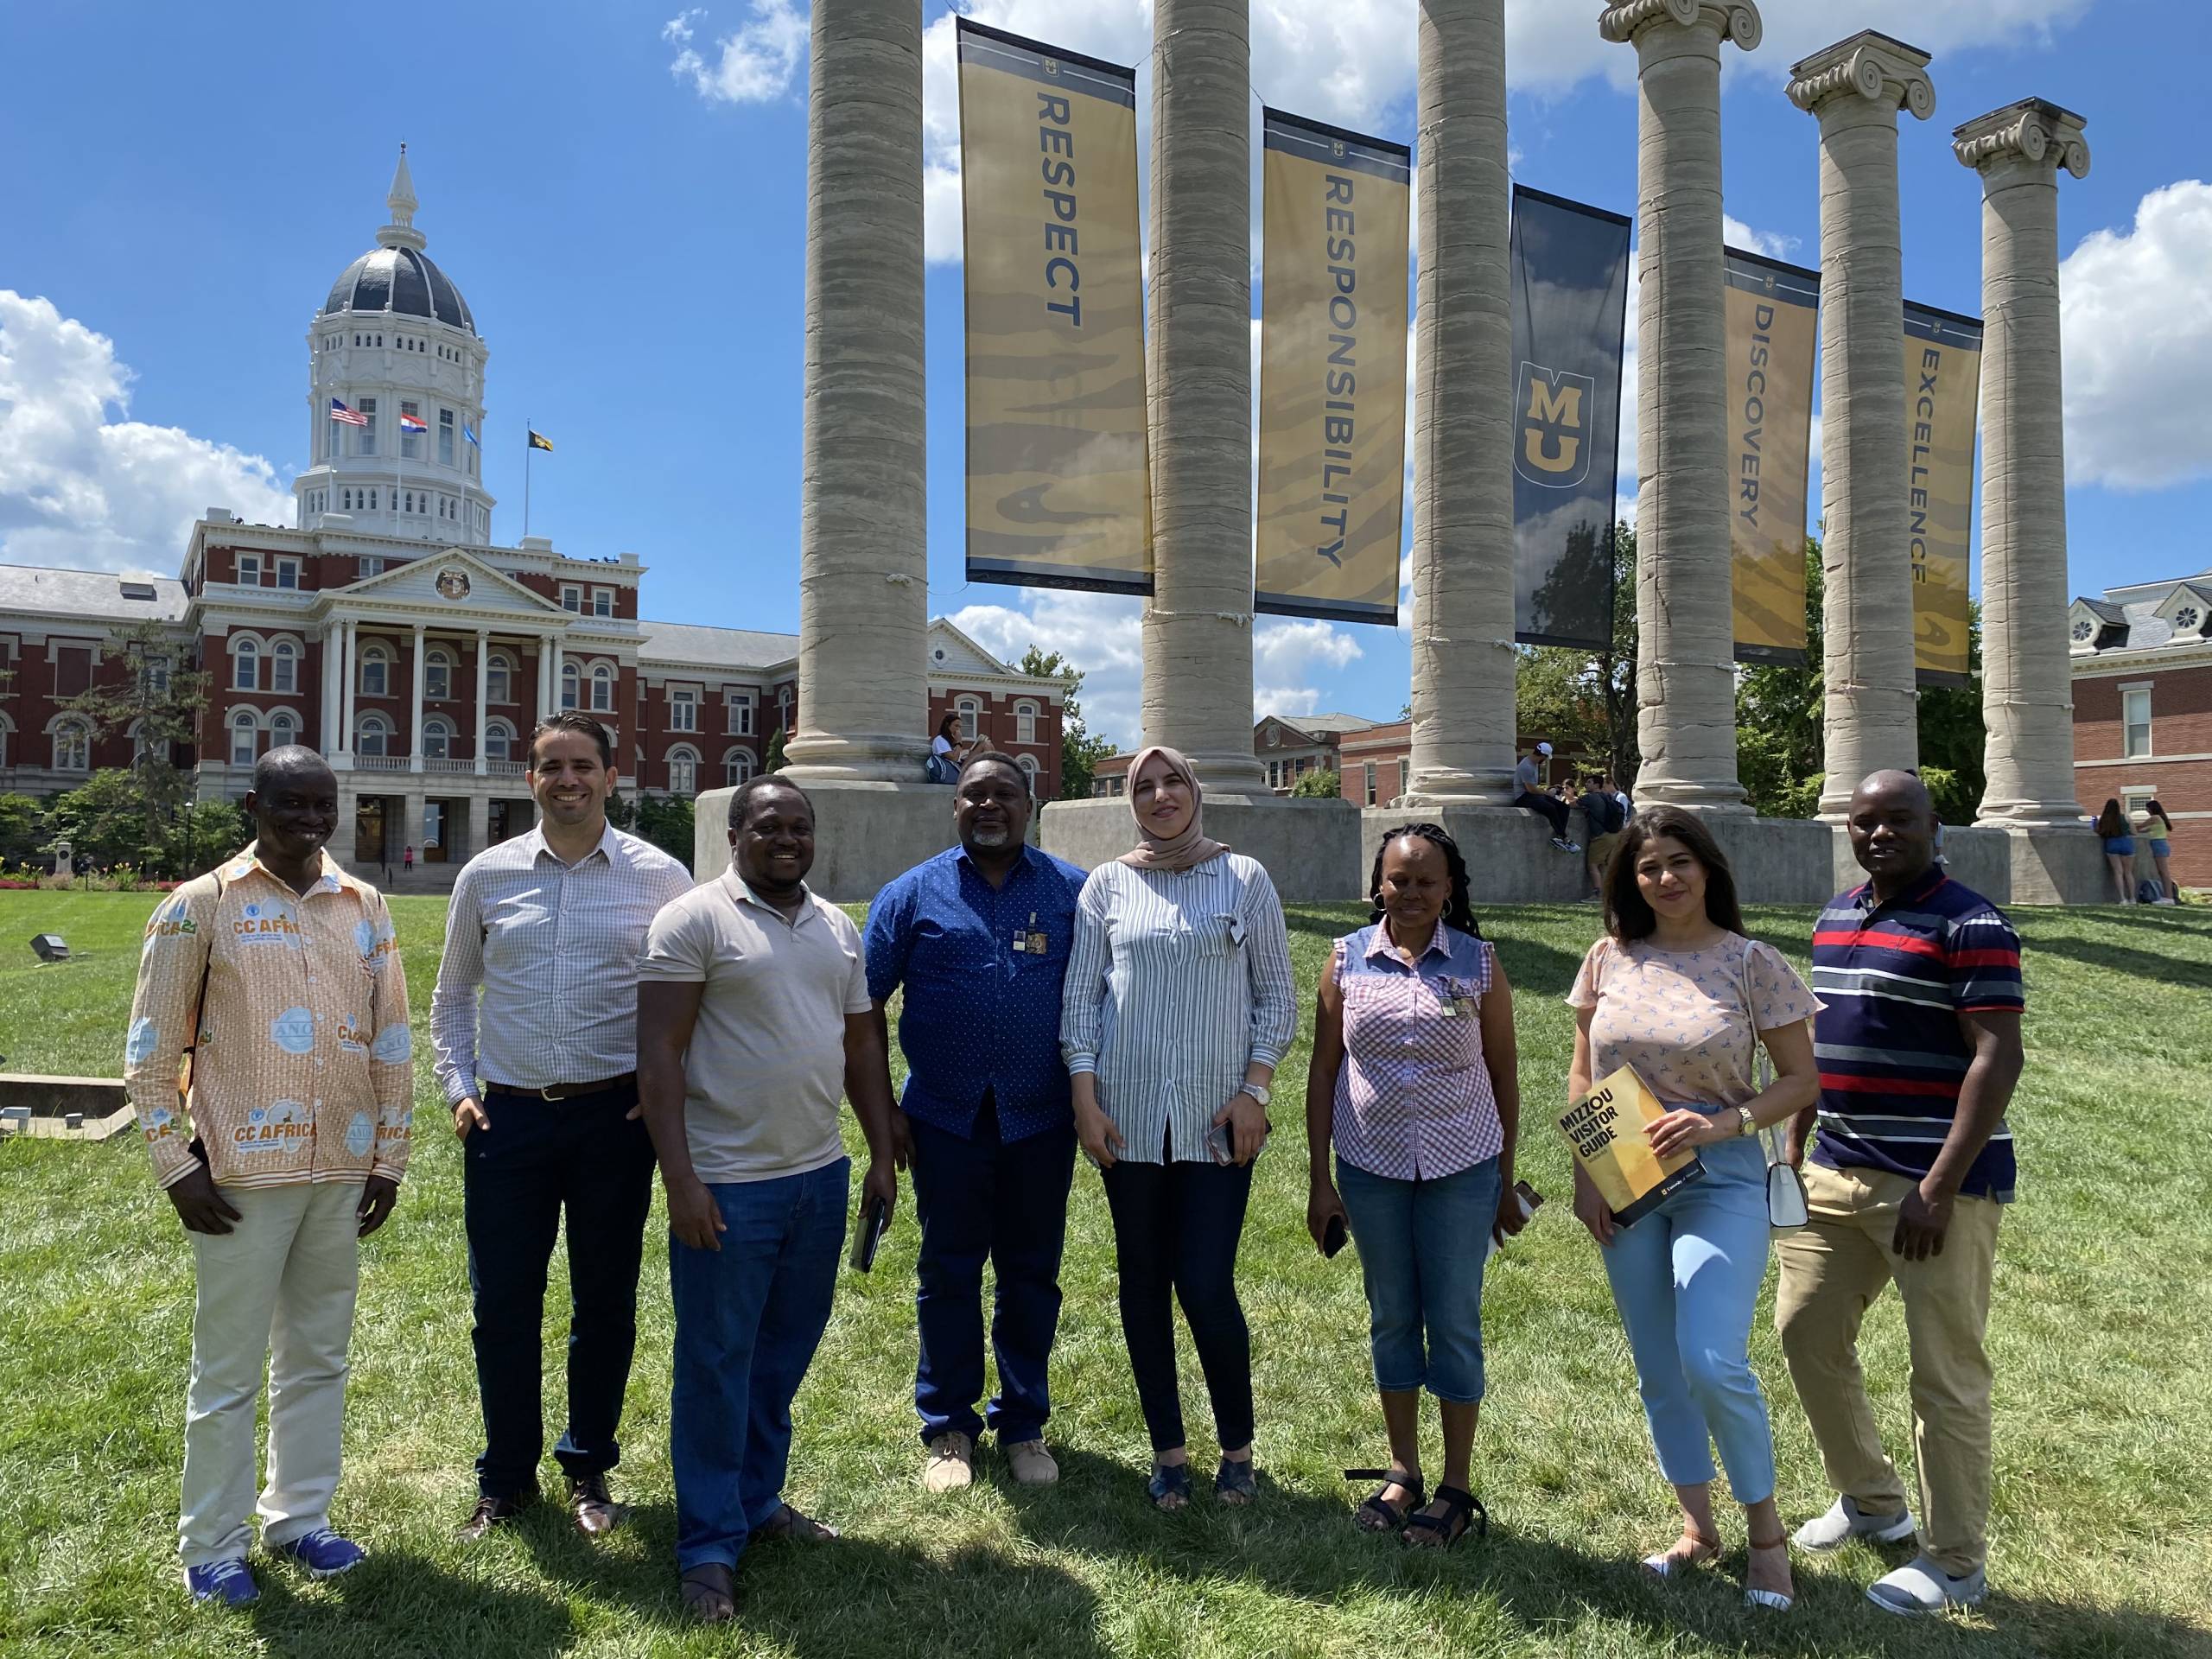 CAFNR Welcomes 10 International Fellows (click to read)